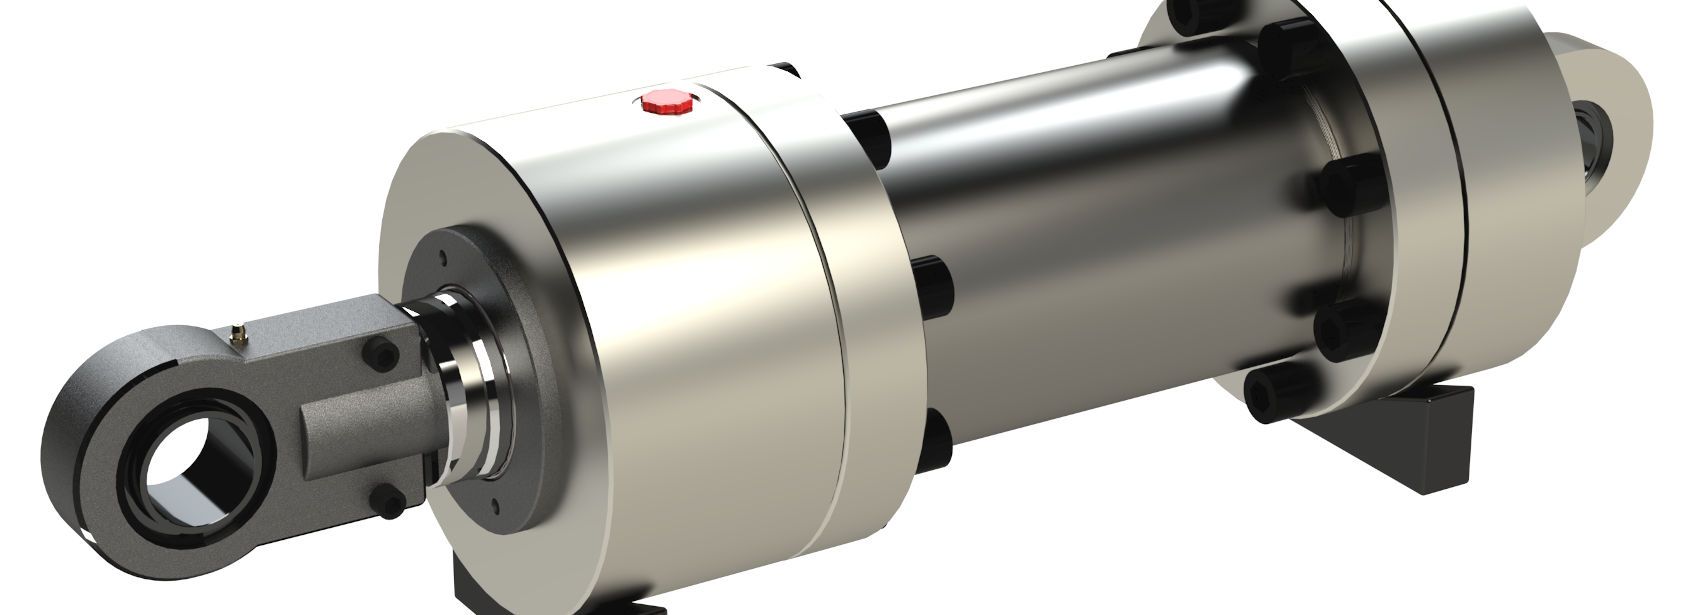 Hydraulic Cylinders & Rotary Actuators header image